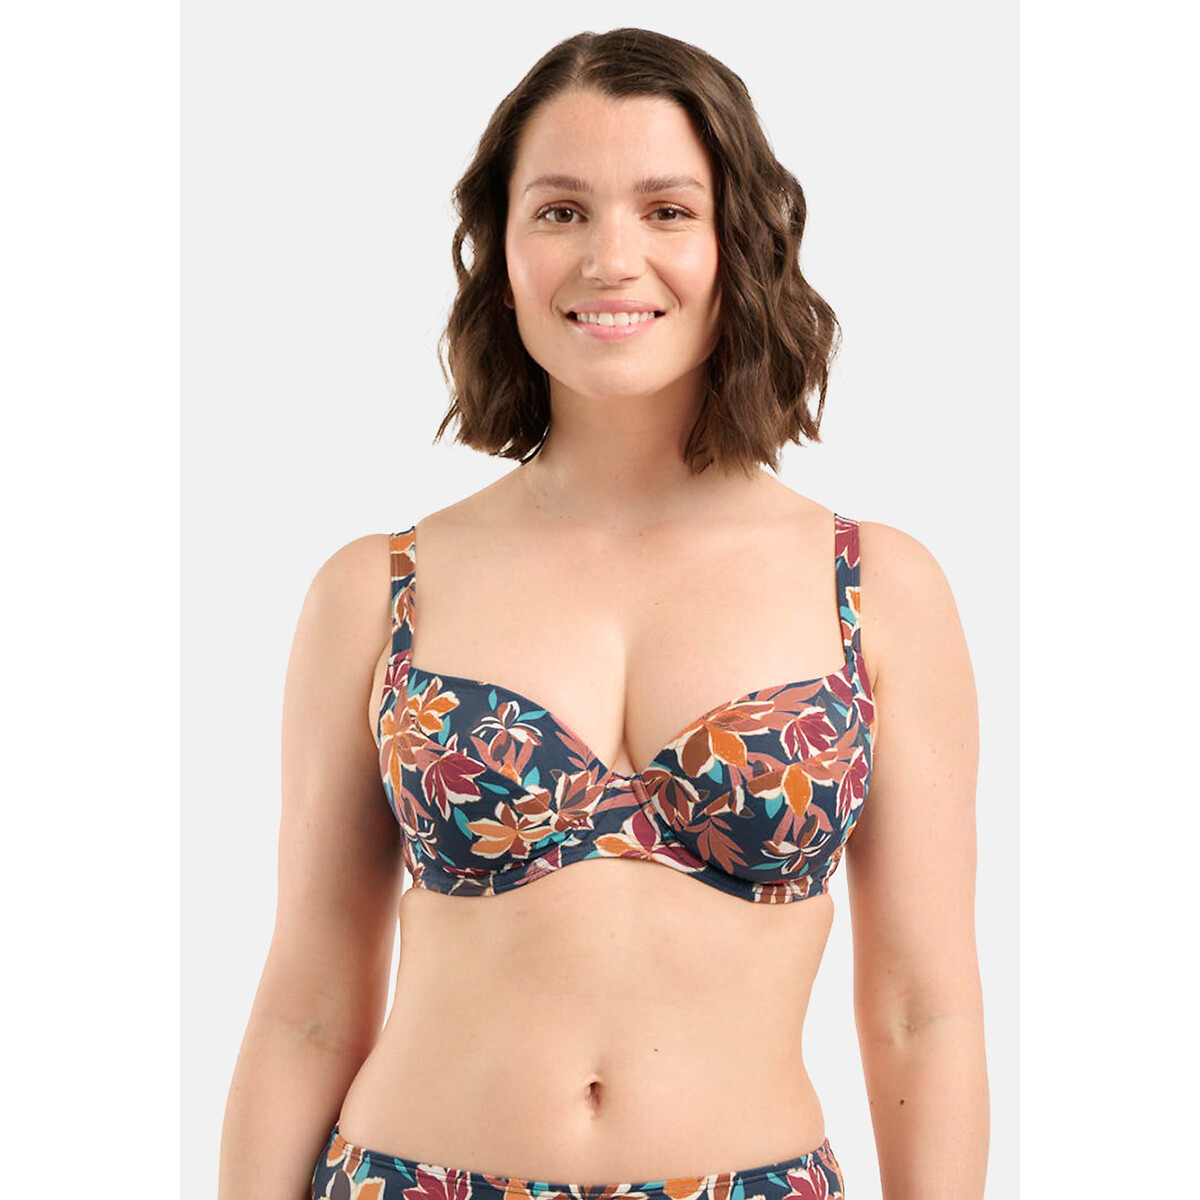 Stay Cation Full Cup Bikini Top in Floral Print